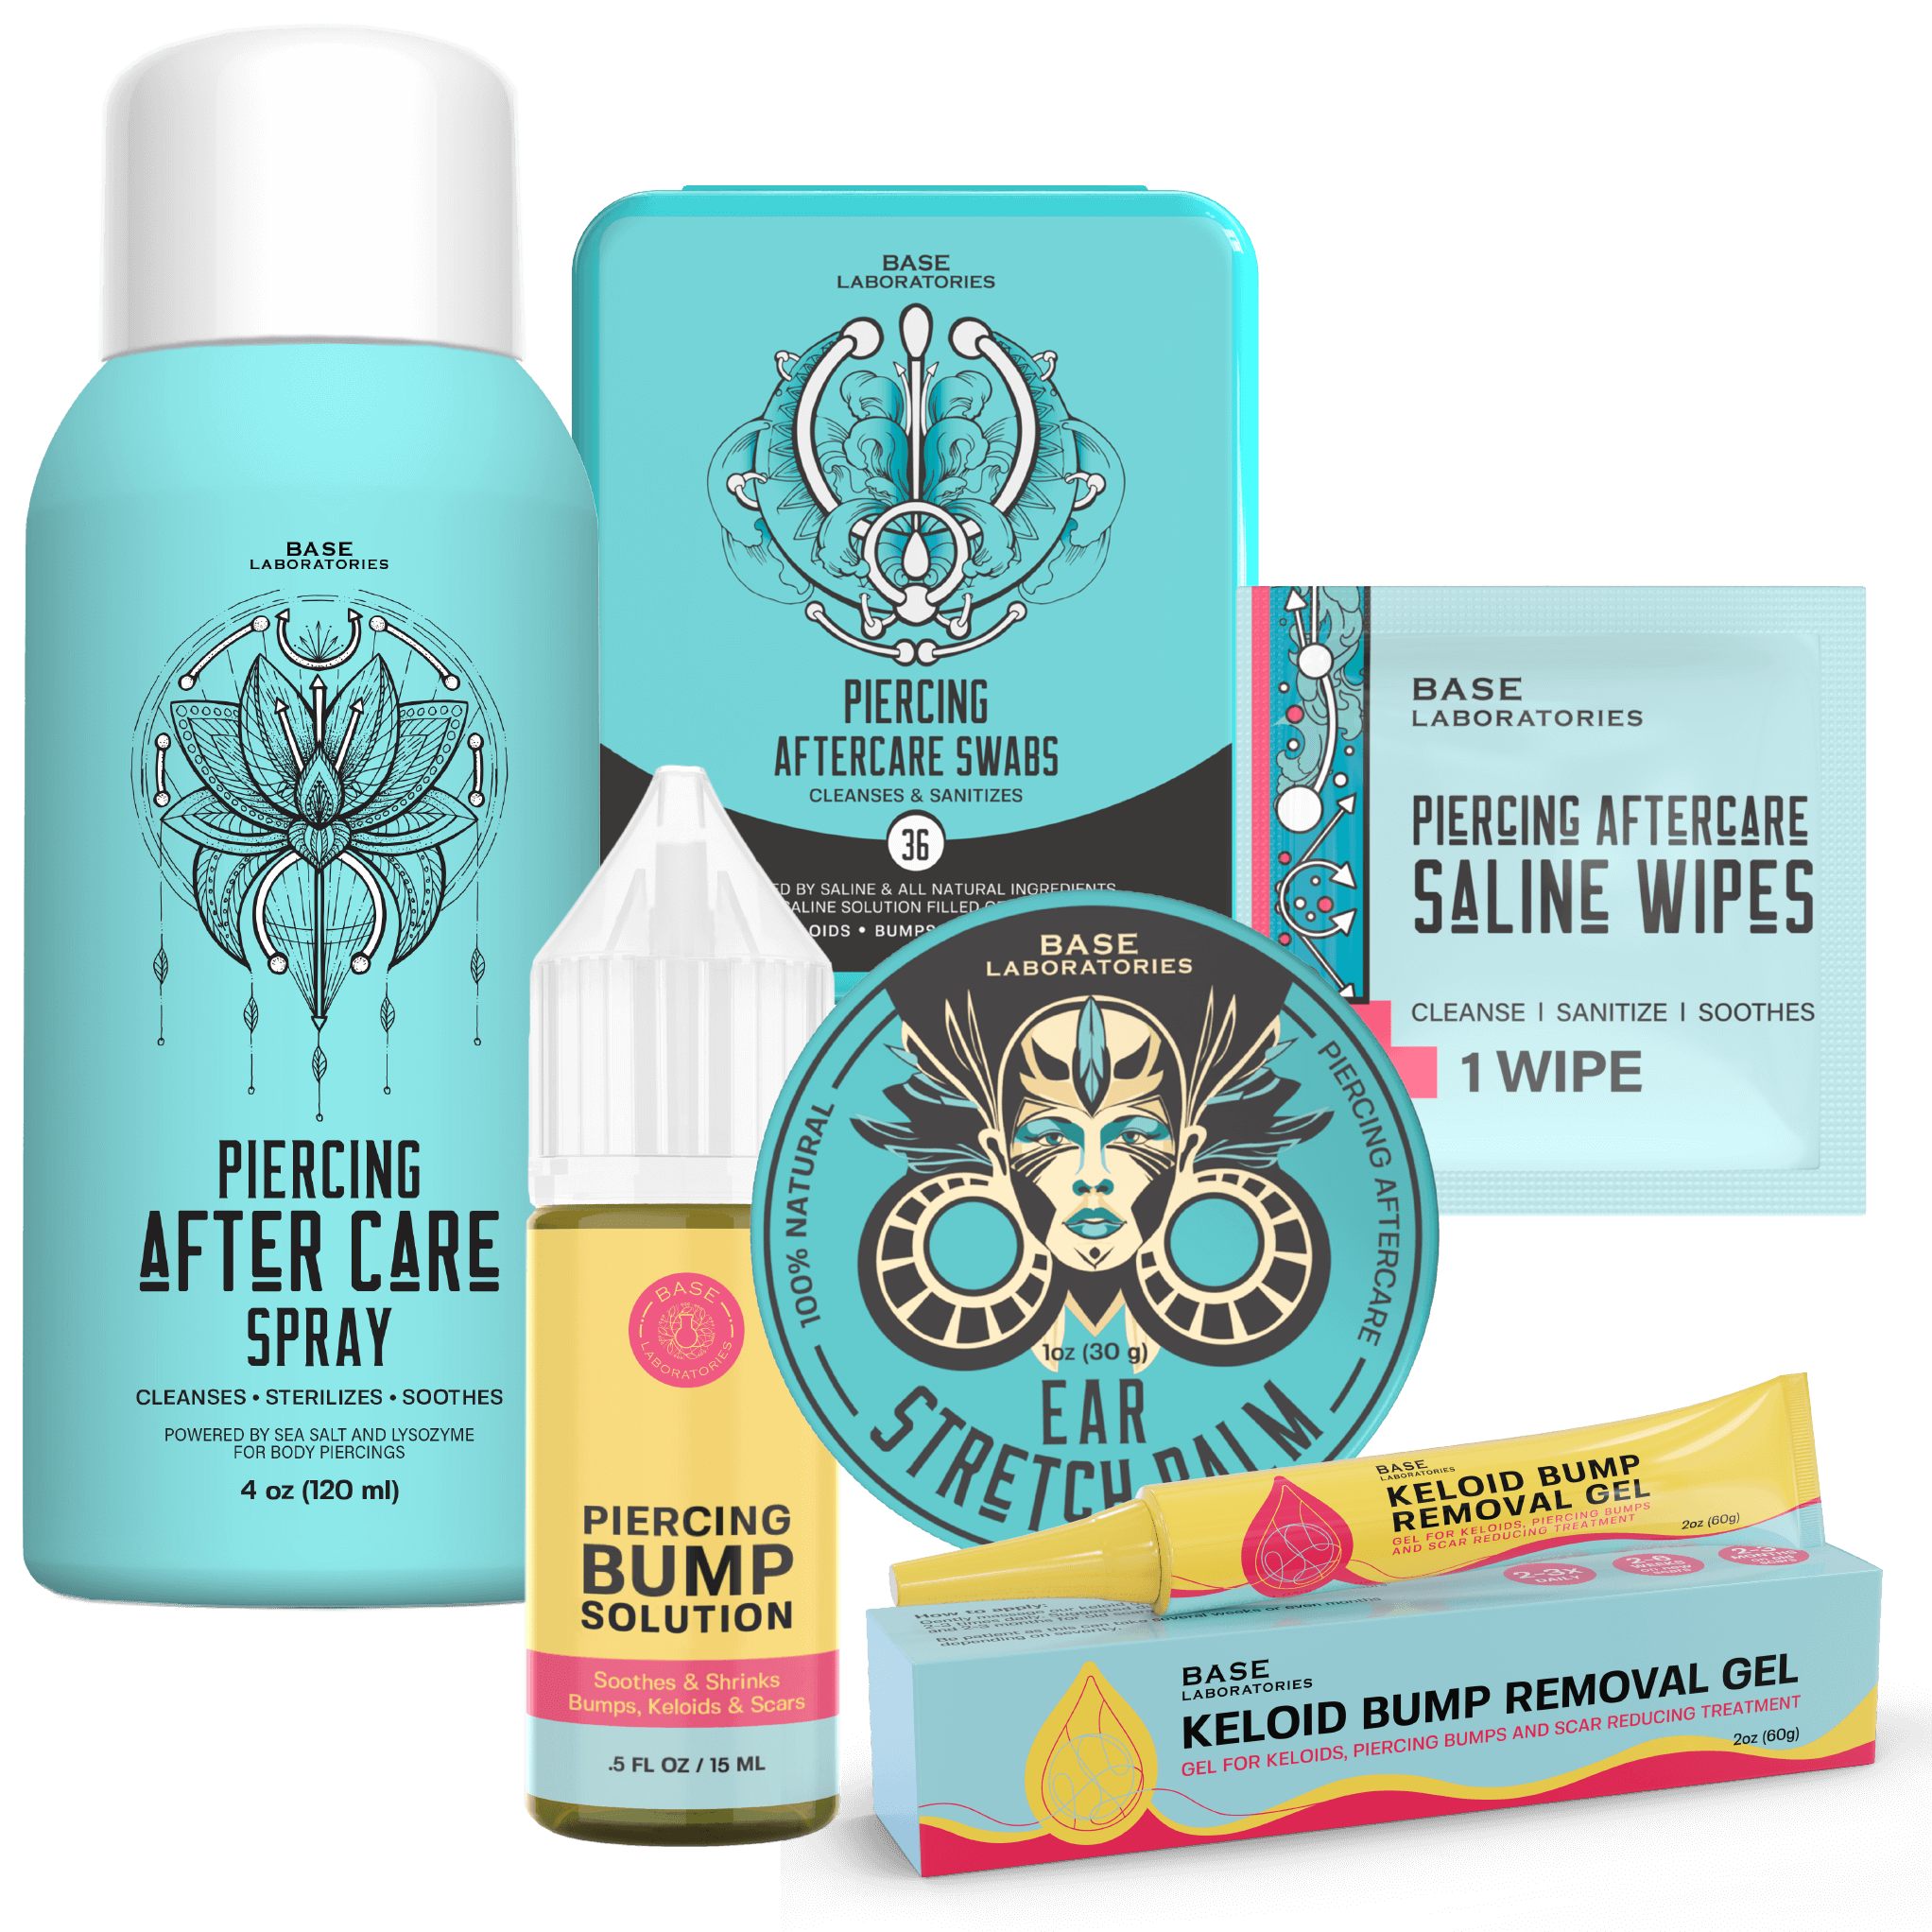 Ultimate Piercing Aftercare + Stretch Collection Bundle Base Laboratories 